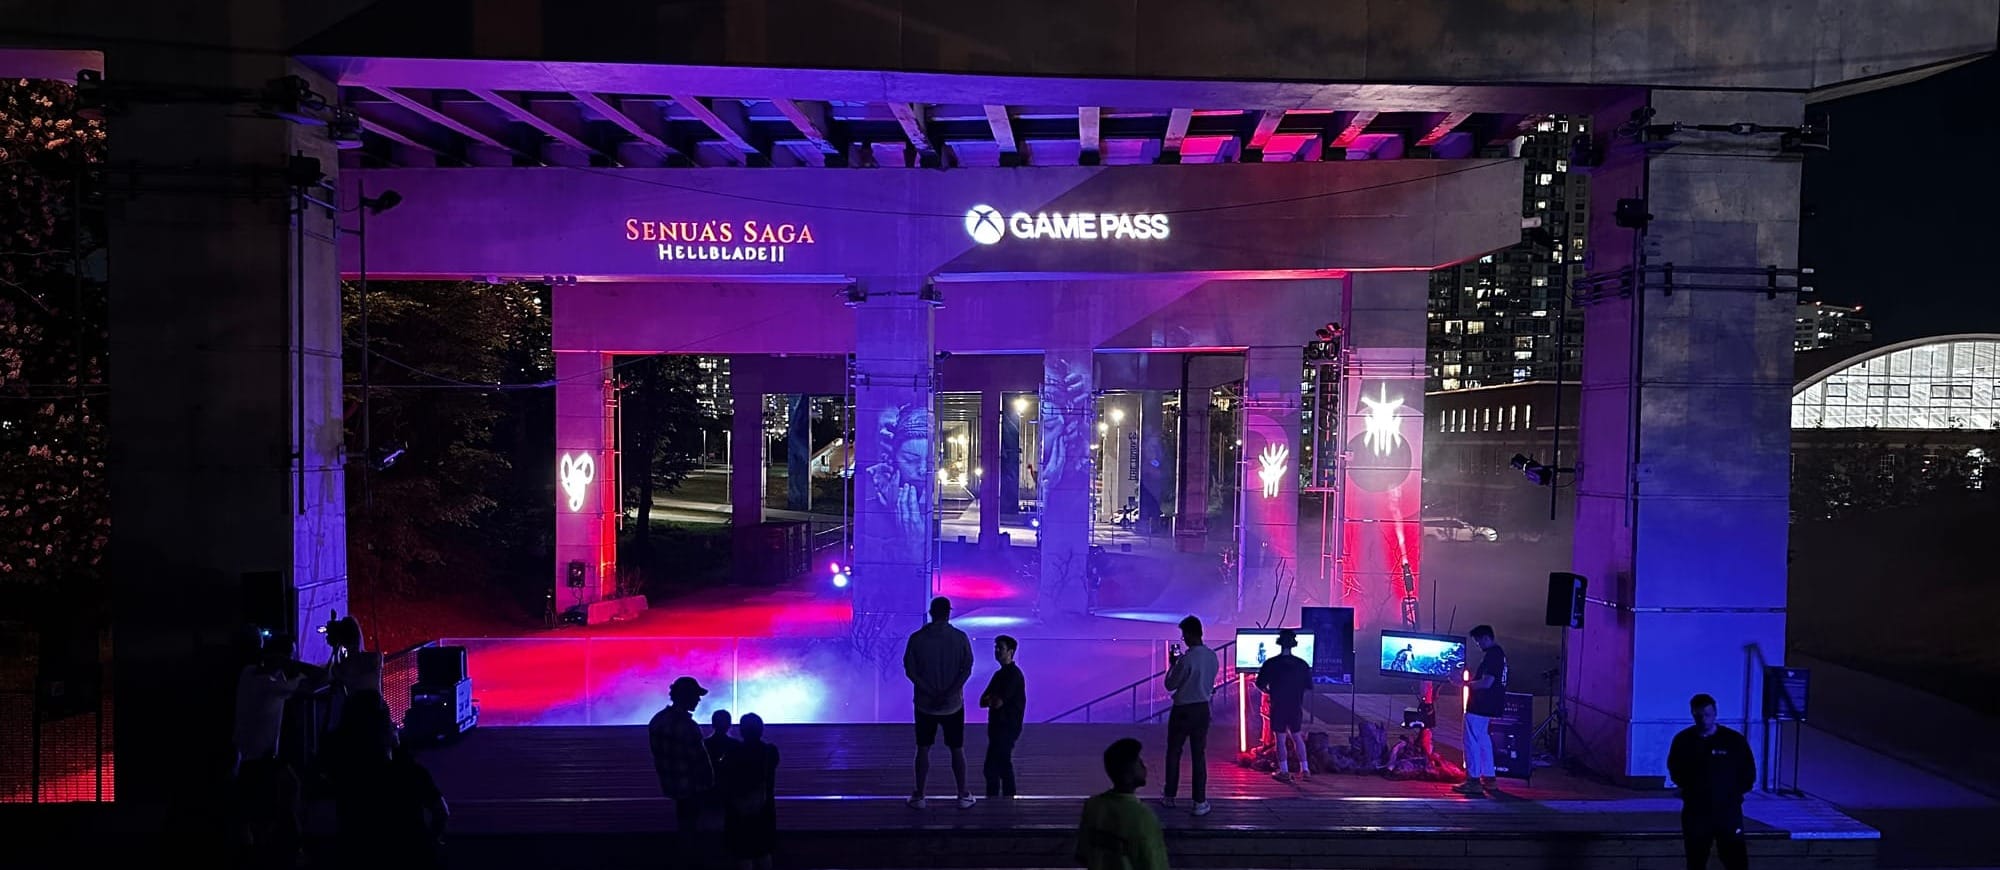 Step into the Mystical World of Senuas Saga: Hellblade II in Immersive Xbox Canada Activation in Toronto